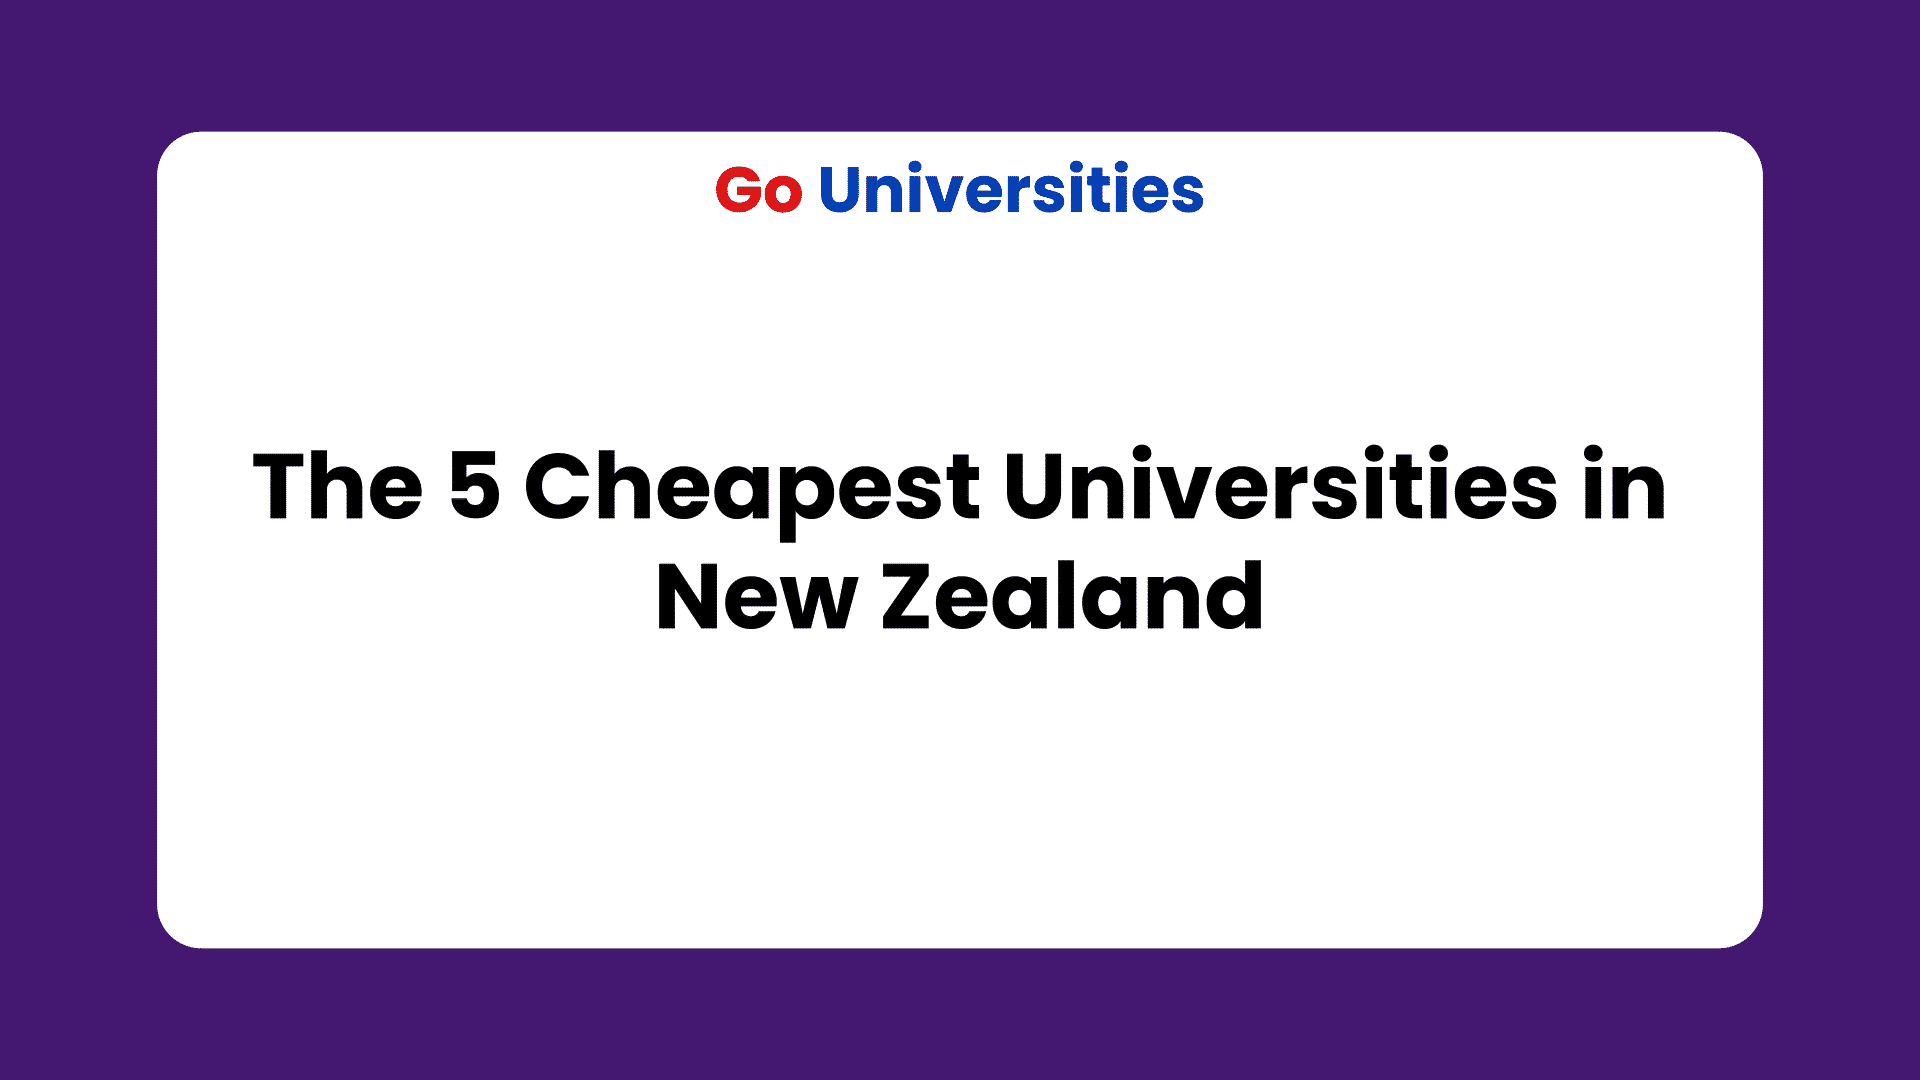 The 5 Cheapest Universities in New Zealand for foreign students